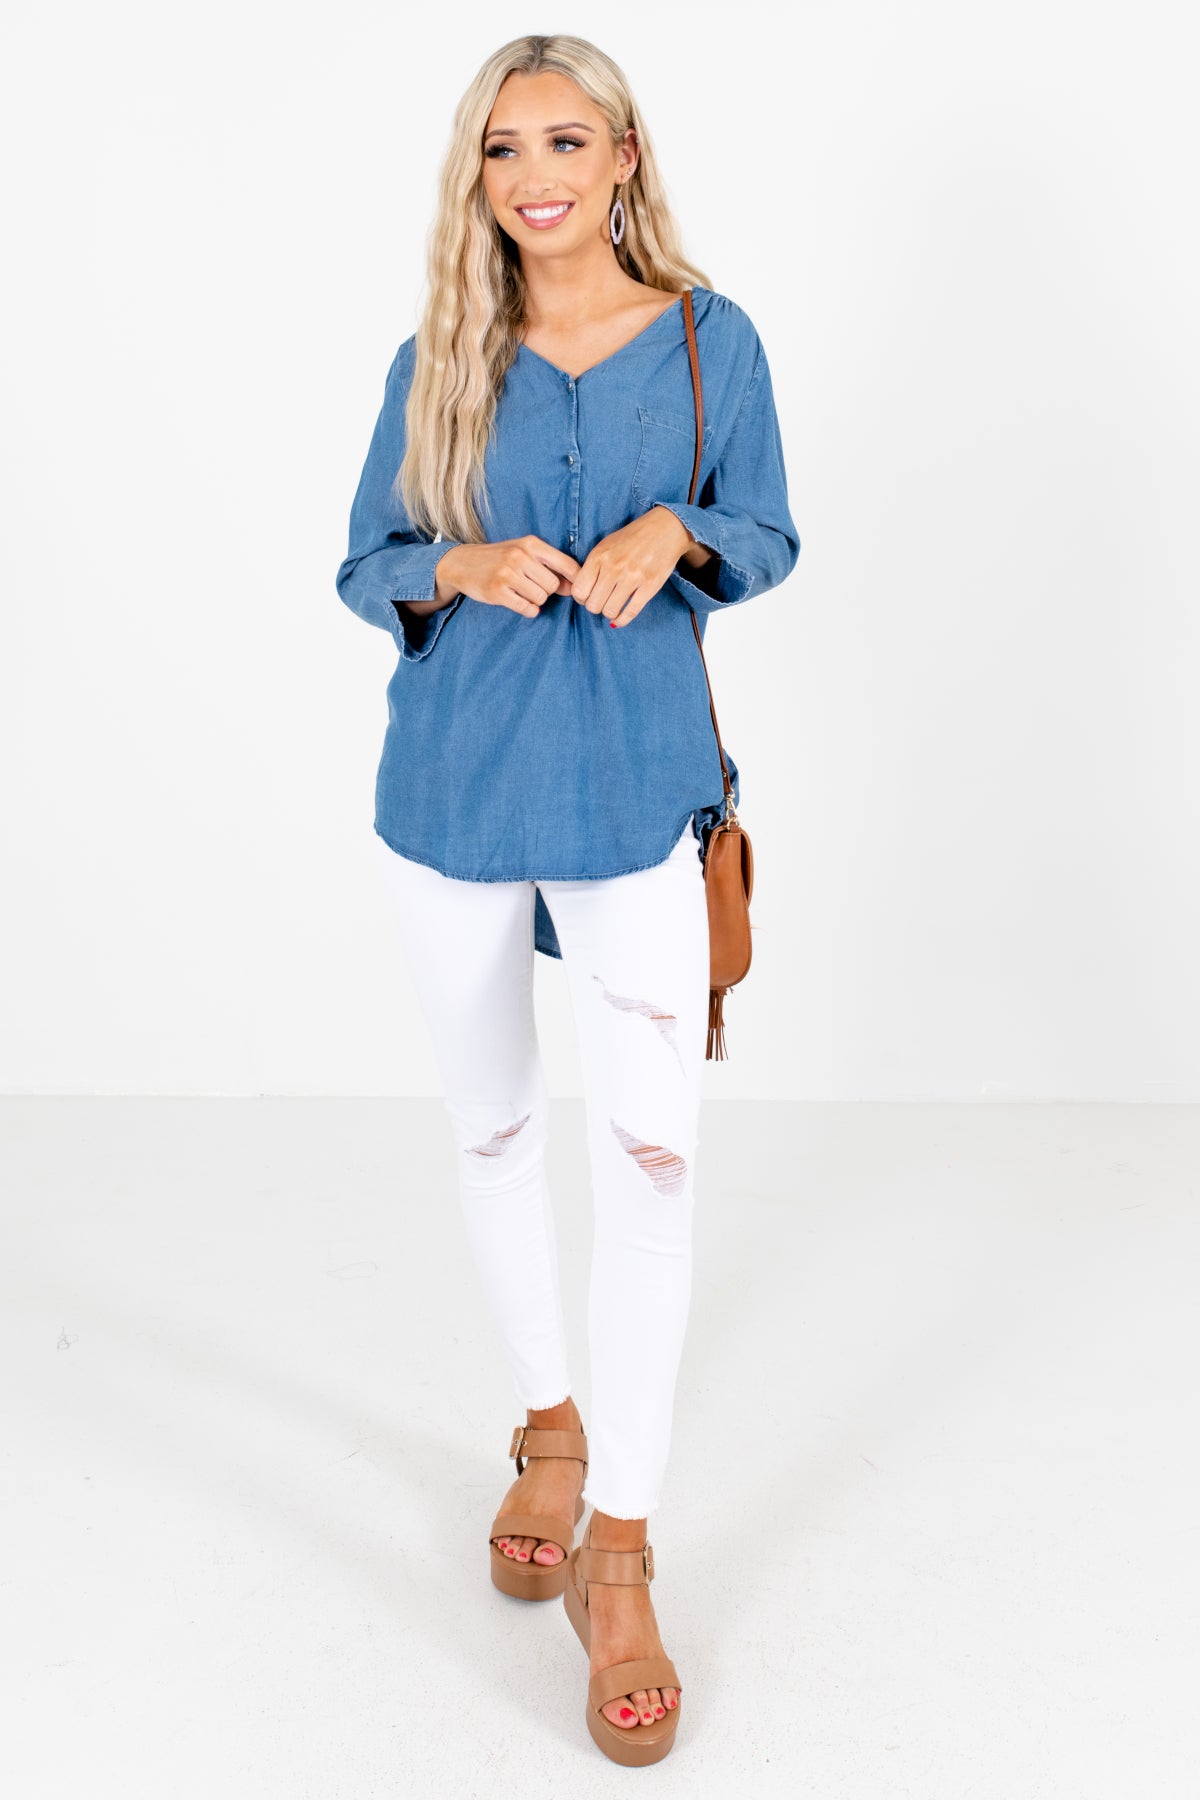 Women's Blue Spring and Summertime Boutique Clothing